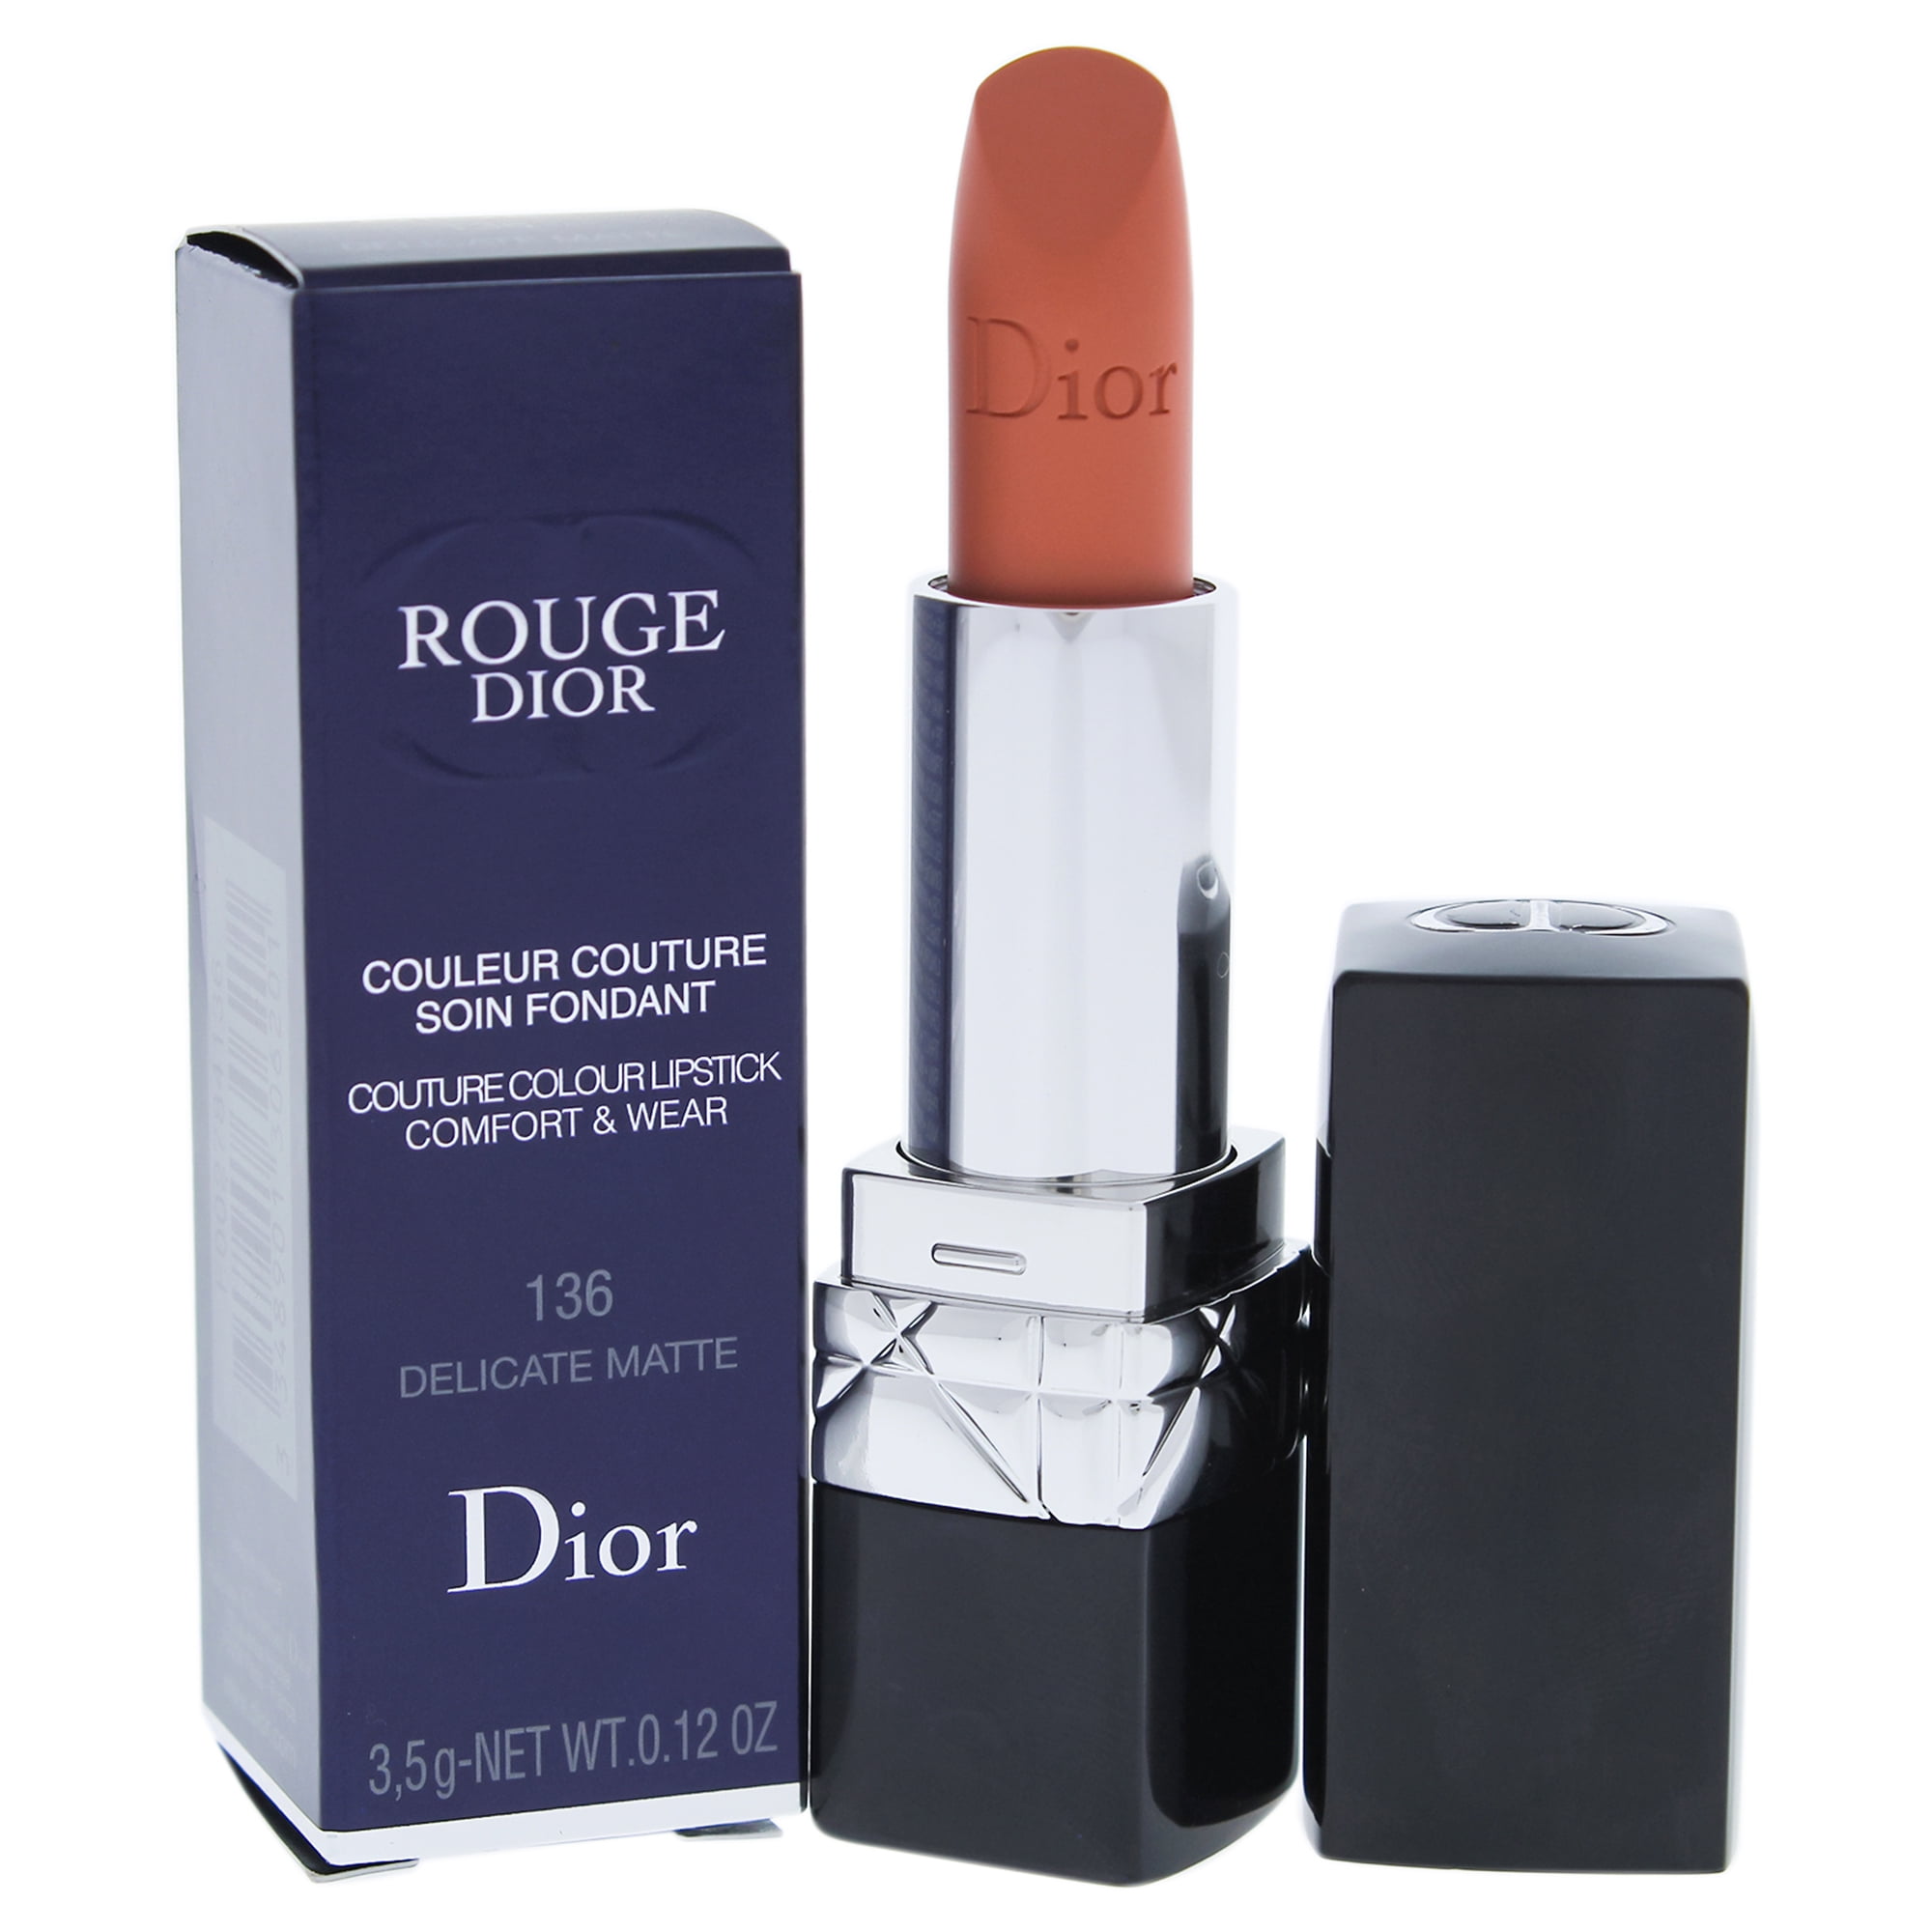 Dior - Rouge Dior Couture Colour Comfort and Wear Lipstick - 136